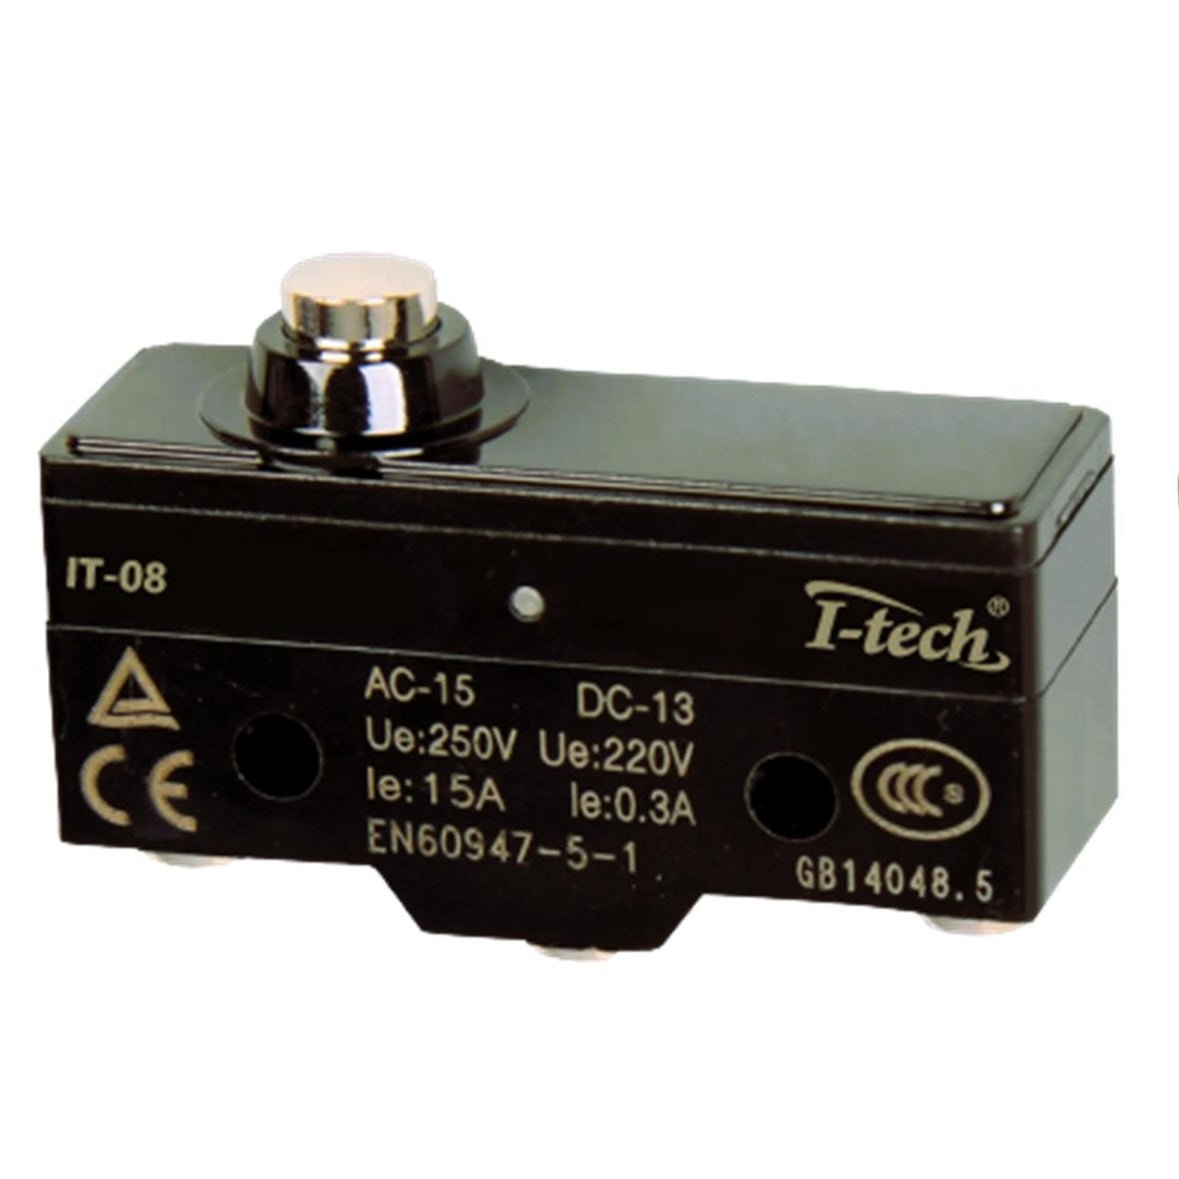 i-tech Micro Switch IT-08(replacement for z15gdb cm1306)